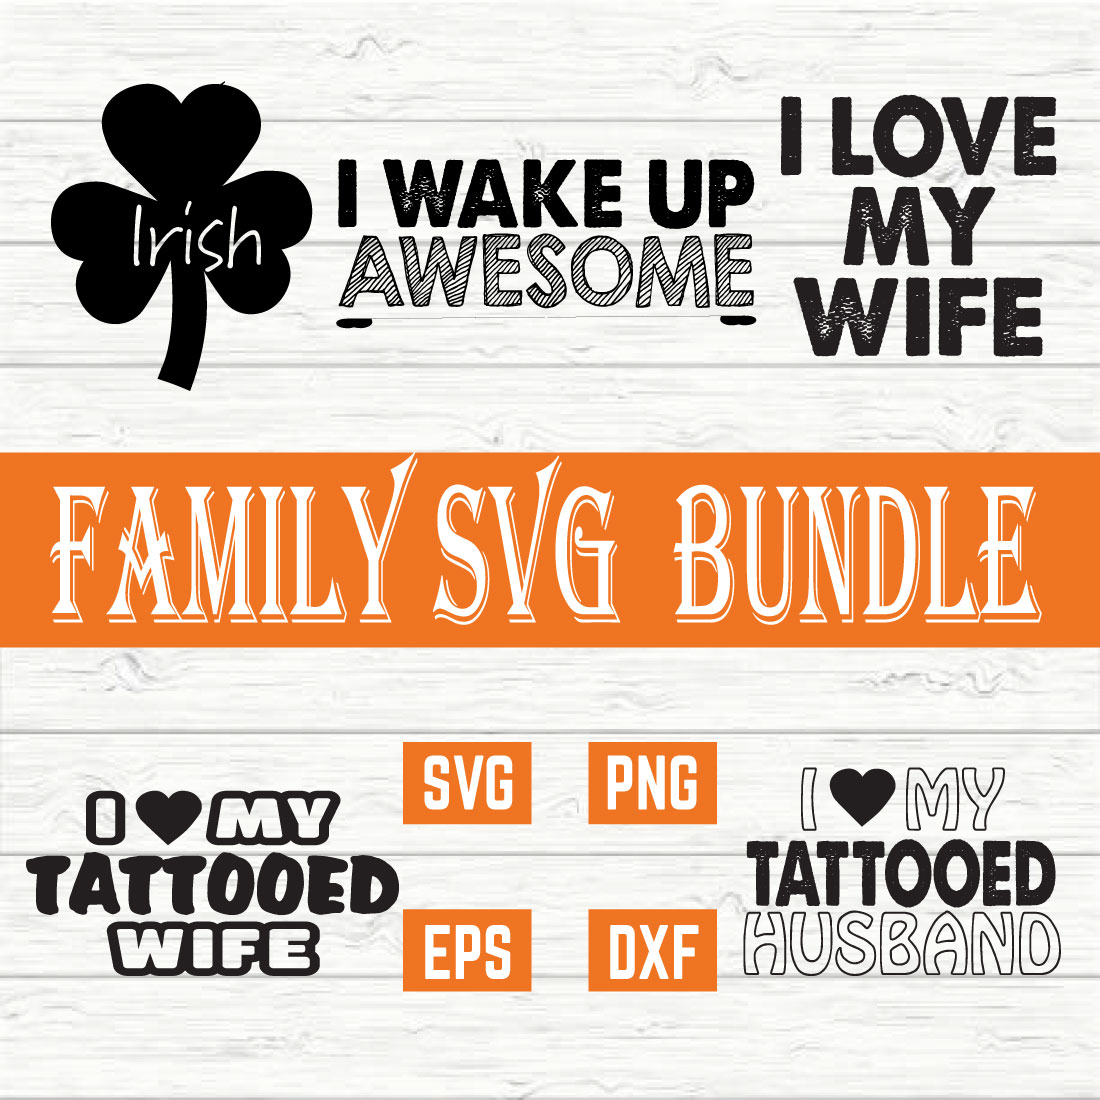 Family Typography Design Bundle vol 18 cover image.